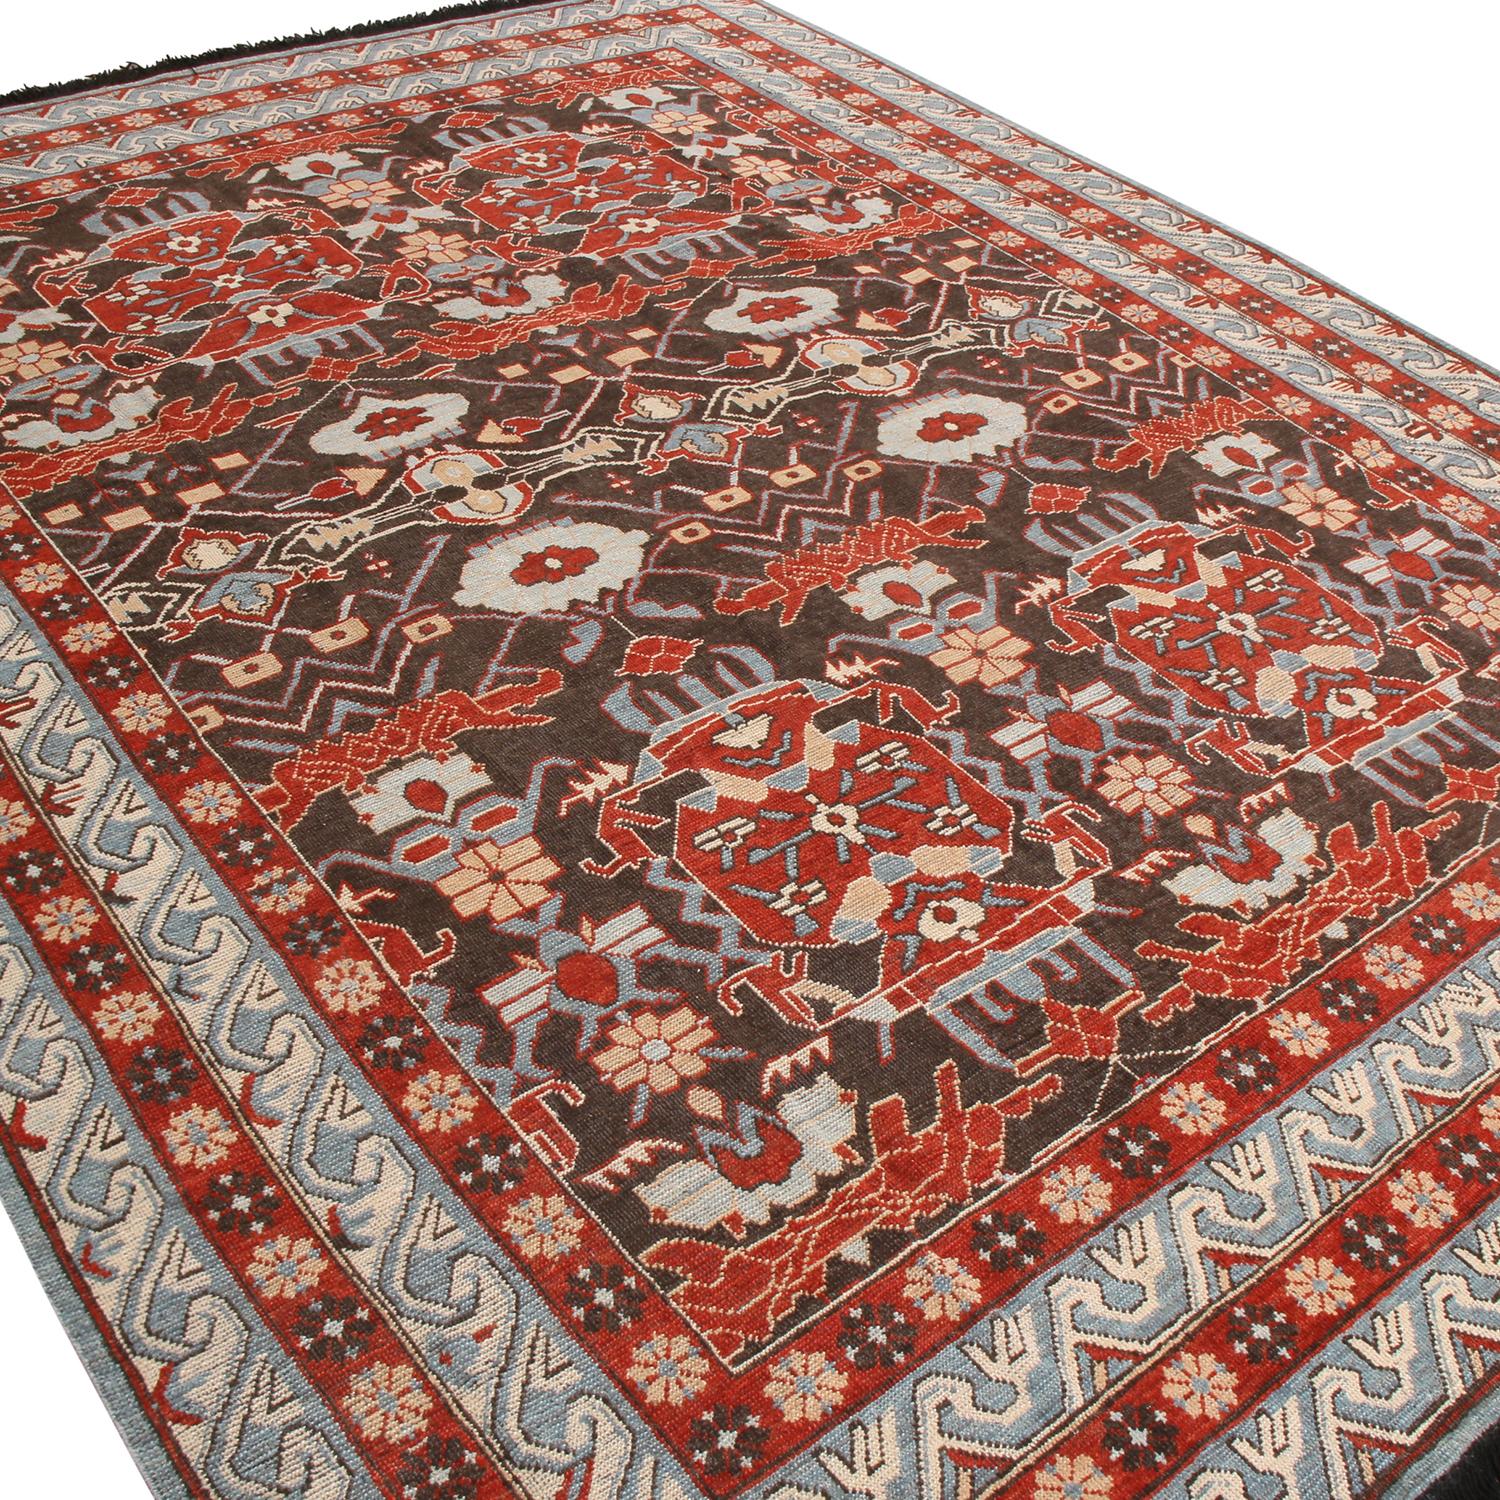 Hand knotted with high-quality wool in India, this rug originates from Rug & Kilim’s premier Burano collection, presenting a kaleidoscopic field symmetry highlighting the intricacy of this design as well as its bold-on-gentle blend of a unique